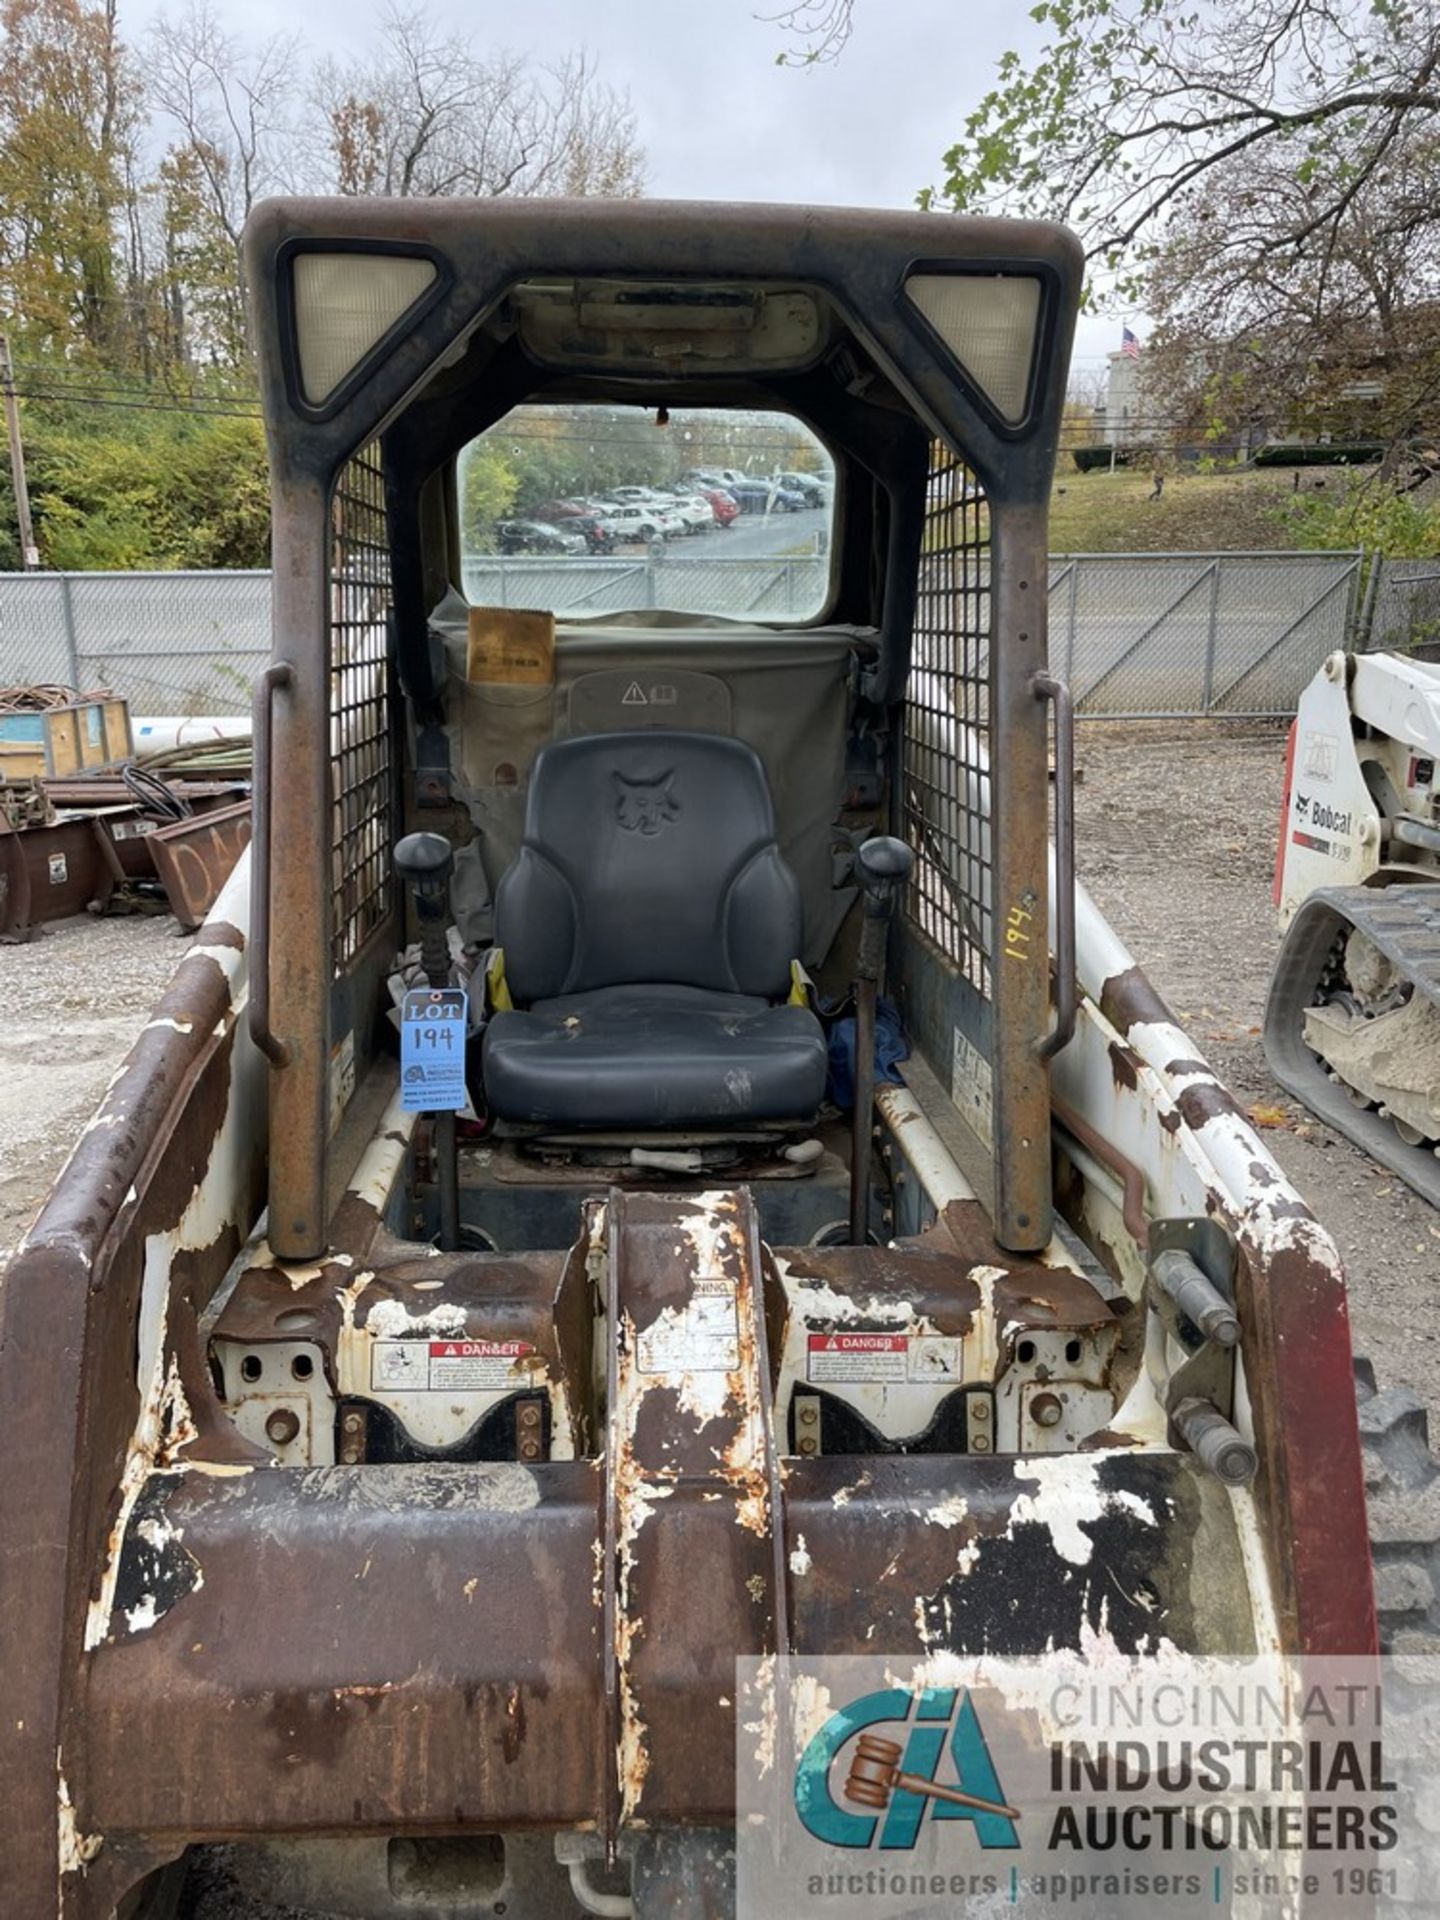 BOBCAT MODEL 863 TURBO COMPACT SKID STEER LOADER; ID # 514444641, 4,024 HOURS SHOWING, 72" BUCKET - Image 8 of 9